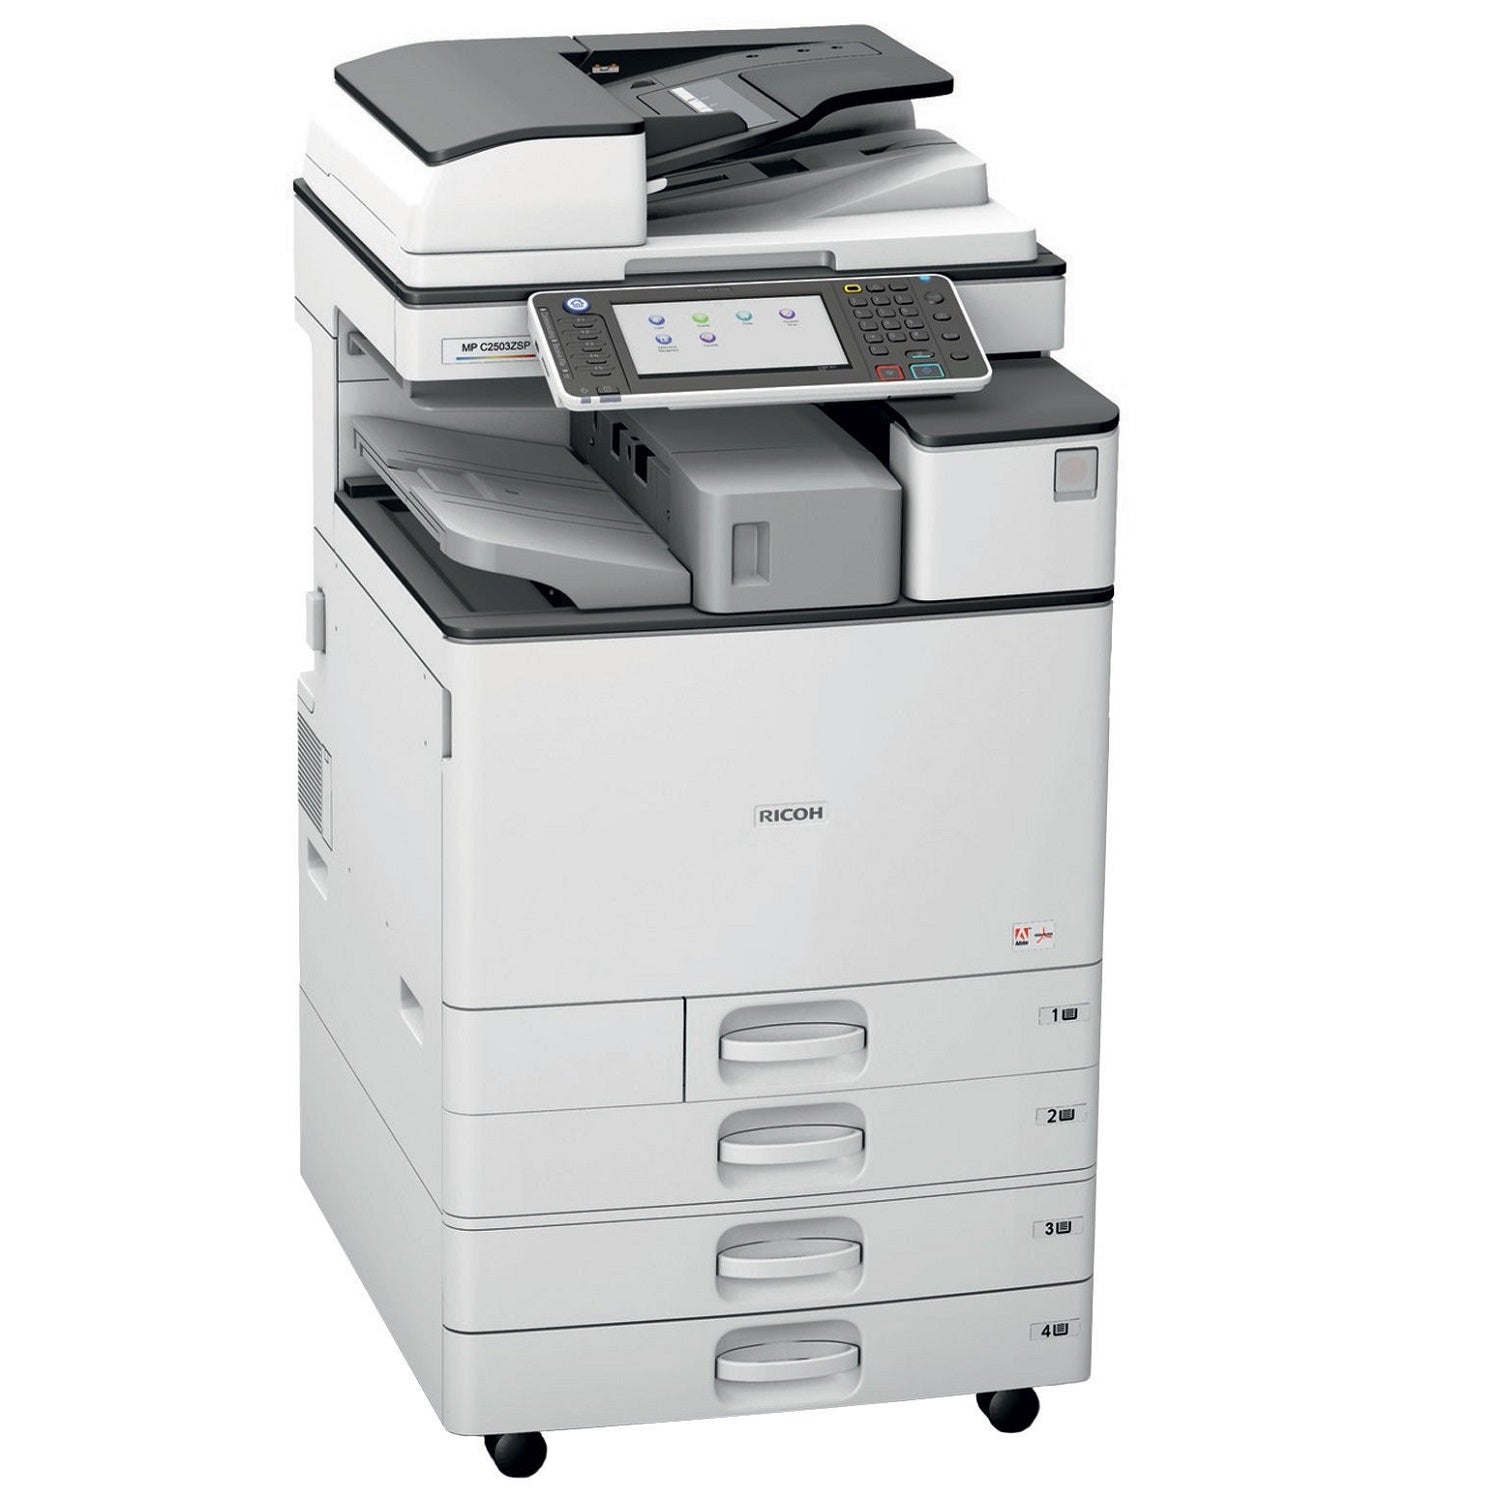 Absolute Toner $72/Month Ricoh MP C3003 A3 Color Laser Multifunction Photocopier Machine With Finisher Stapler Copier Color Printer For Sale - Easy To Use Color Printer And Better for Your Business Showroom Color Copiers